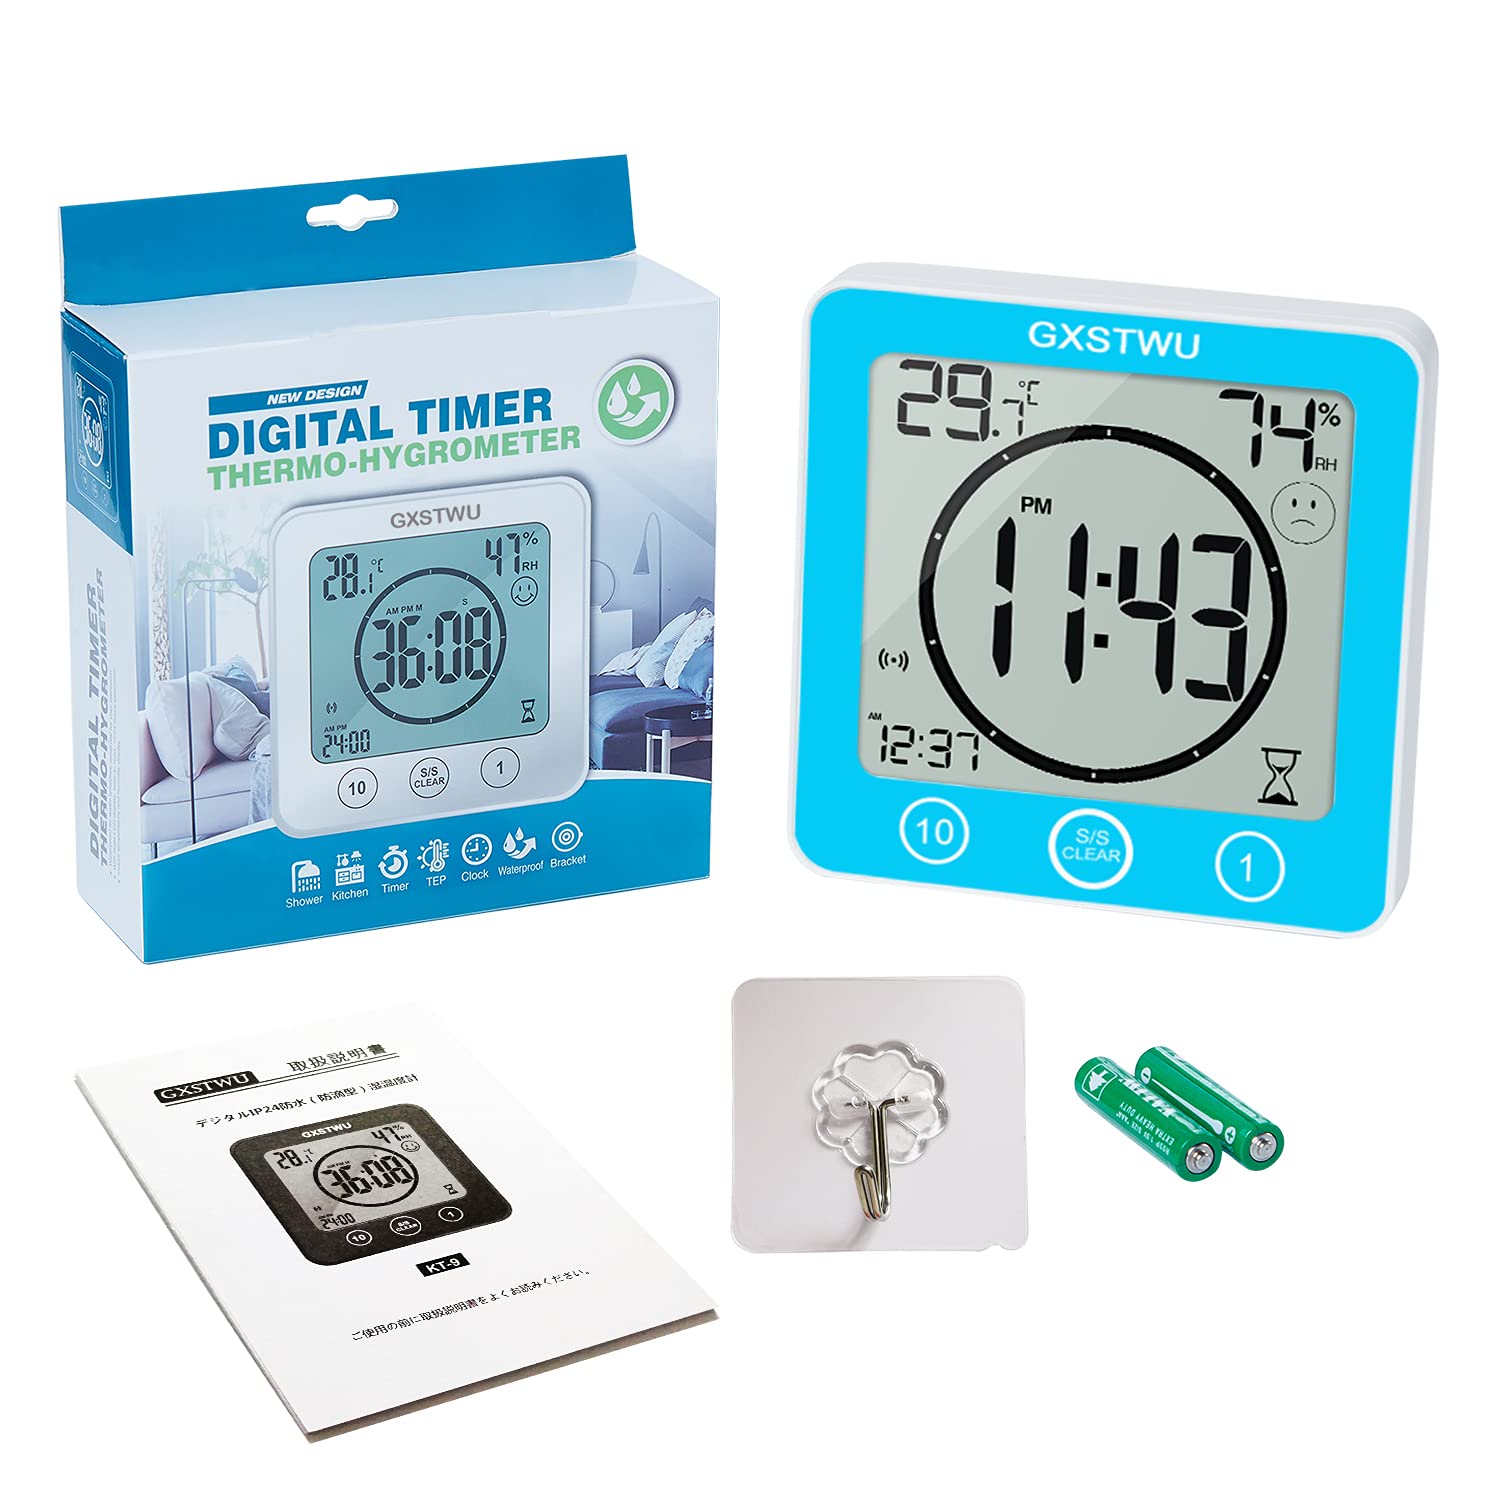 GXSTWU Digital Timer Shower Clock Waterproof【Waterproof for Water Spray】 with Alarm, Bathroom Kitchen Wall Clock, Touch Screen Timer, Thermometer Hygrometer Suction Cup Hanging Hole Stand Magnet Blue